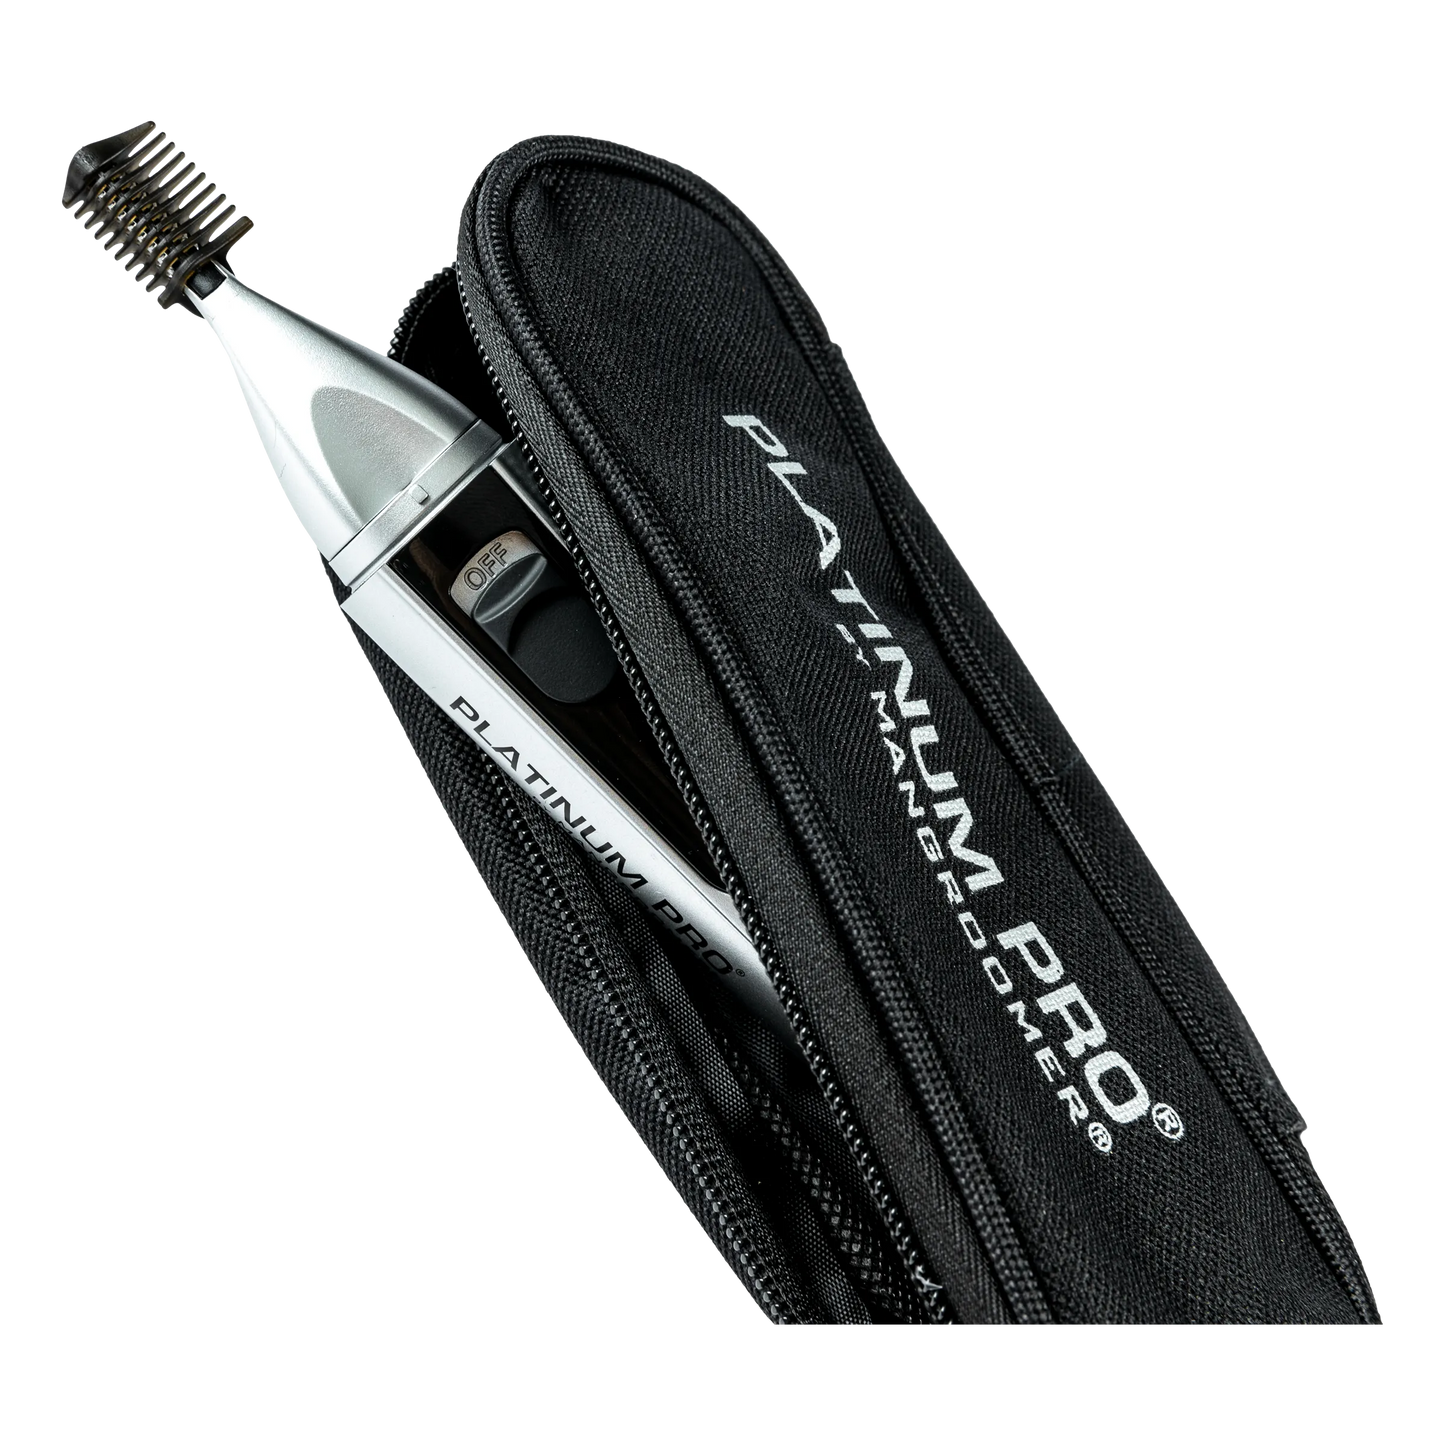 PLATINUM PRO by MANGROOMER -  New Advanced Nose Trimmer, Ear Hair Trimmer and Eyebrow Trimmer with Bonus Light and Exclusive Storage Case!